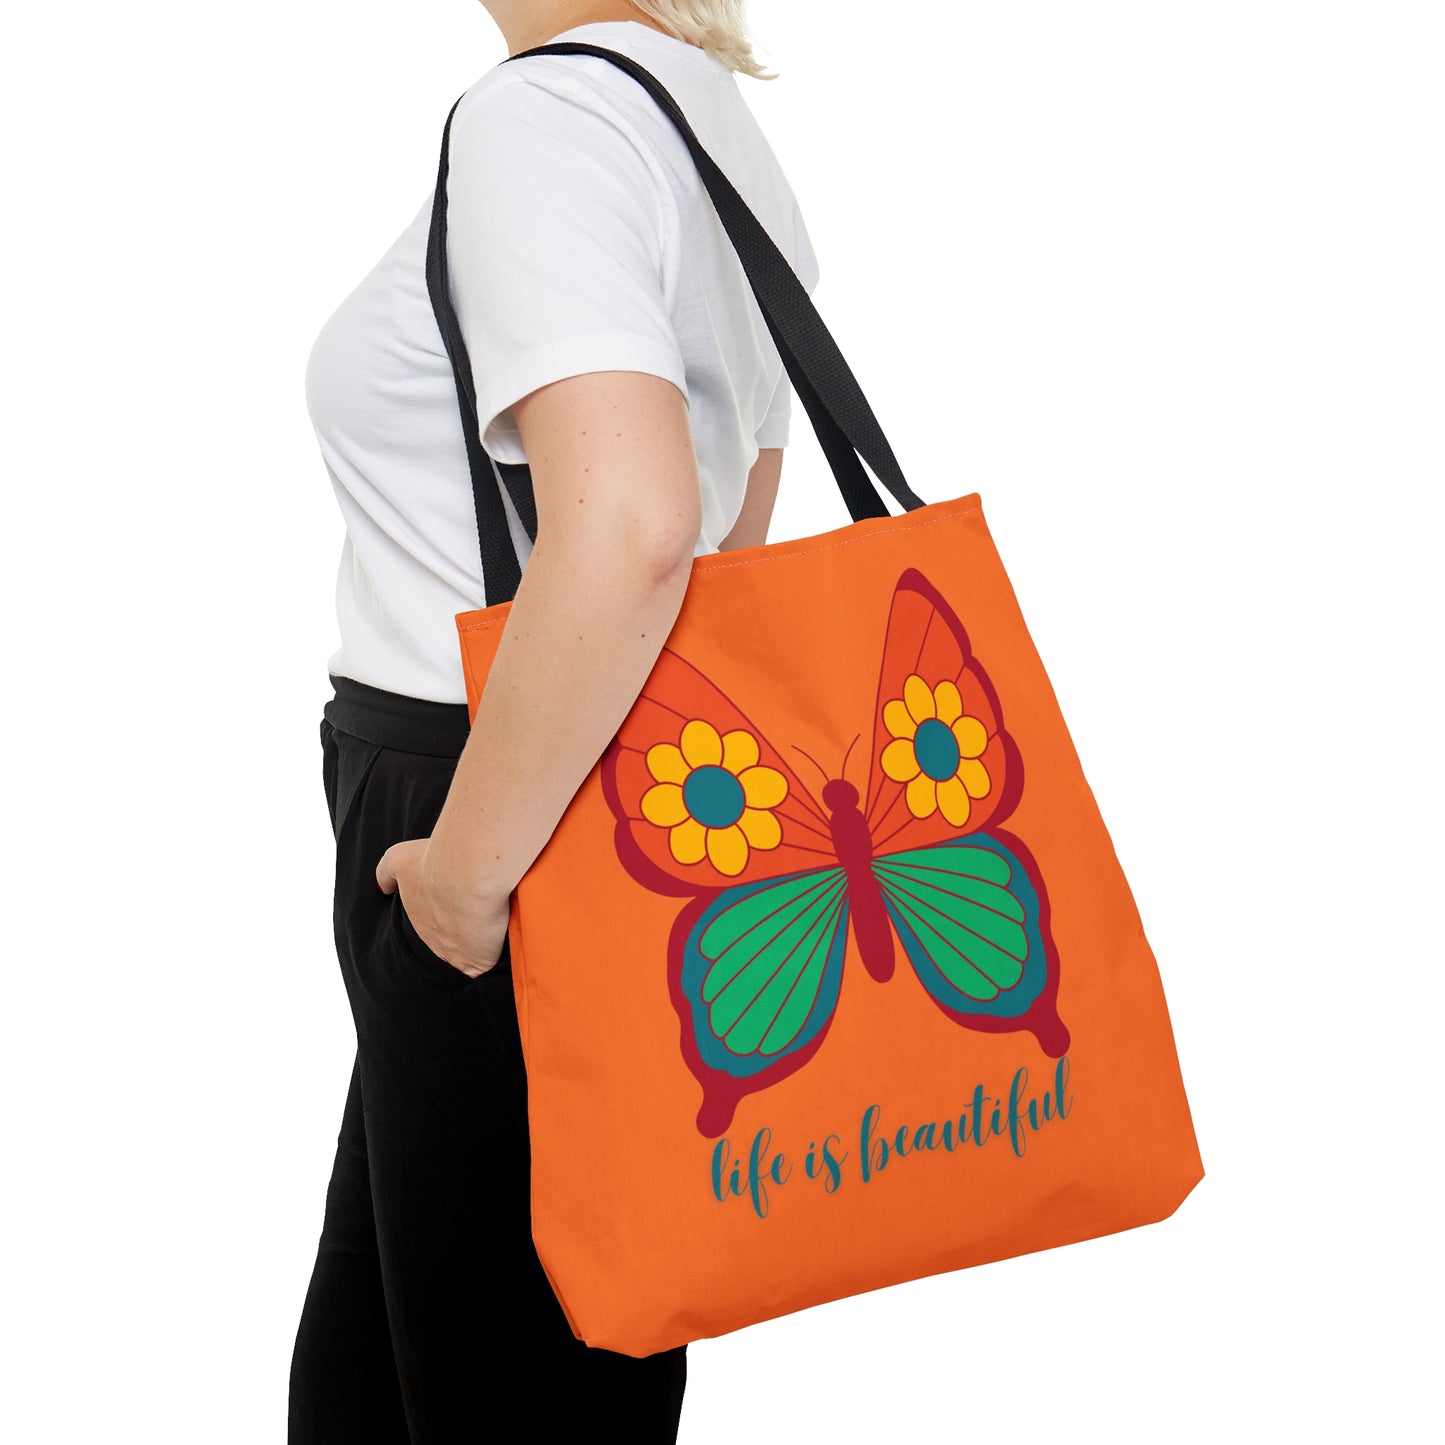 Cute and simple message “life is beautiful” under a butterfly design tote bag. Come in 3 sizes to meet your needs.